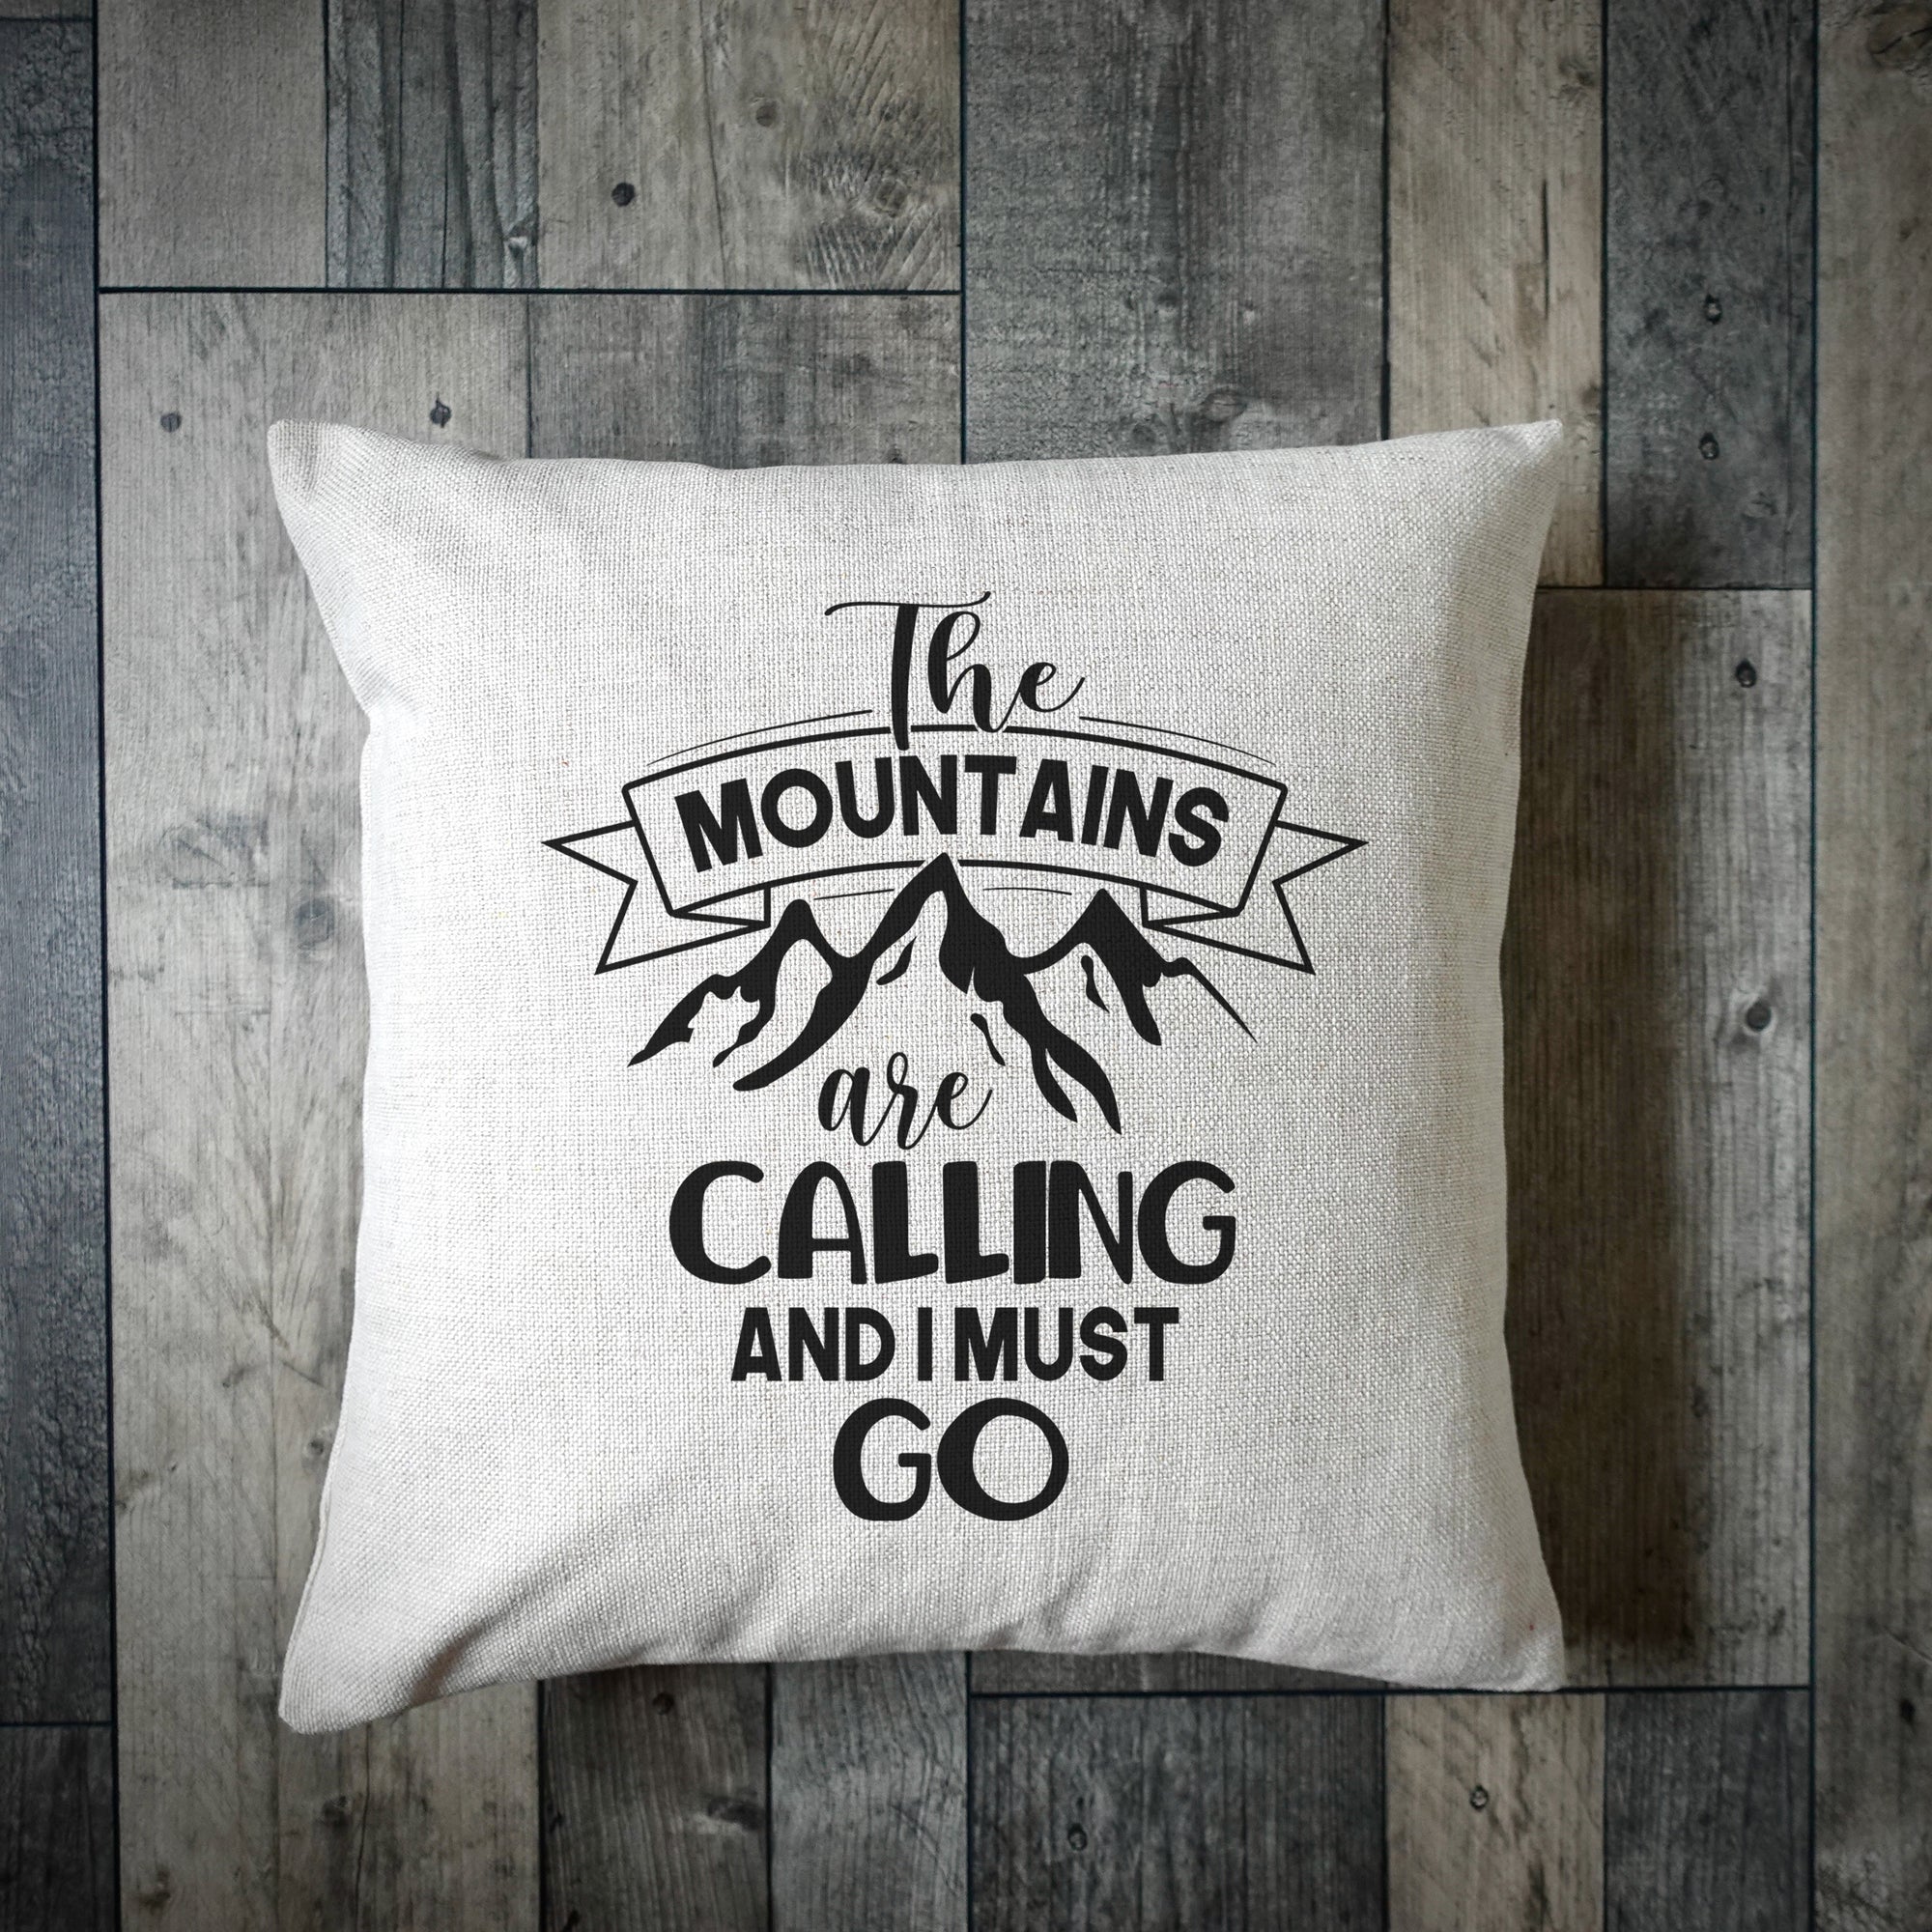 The Mountains Are Calling And I Must Go Cushion